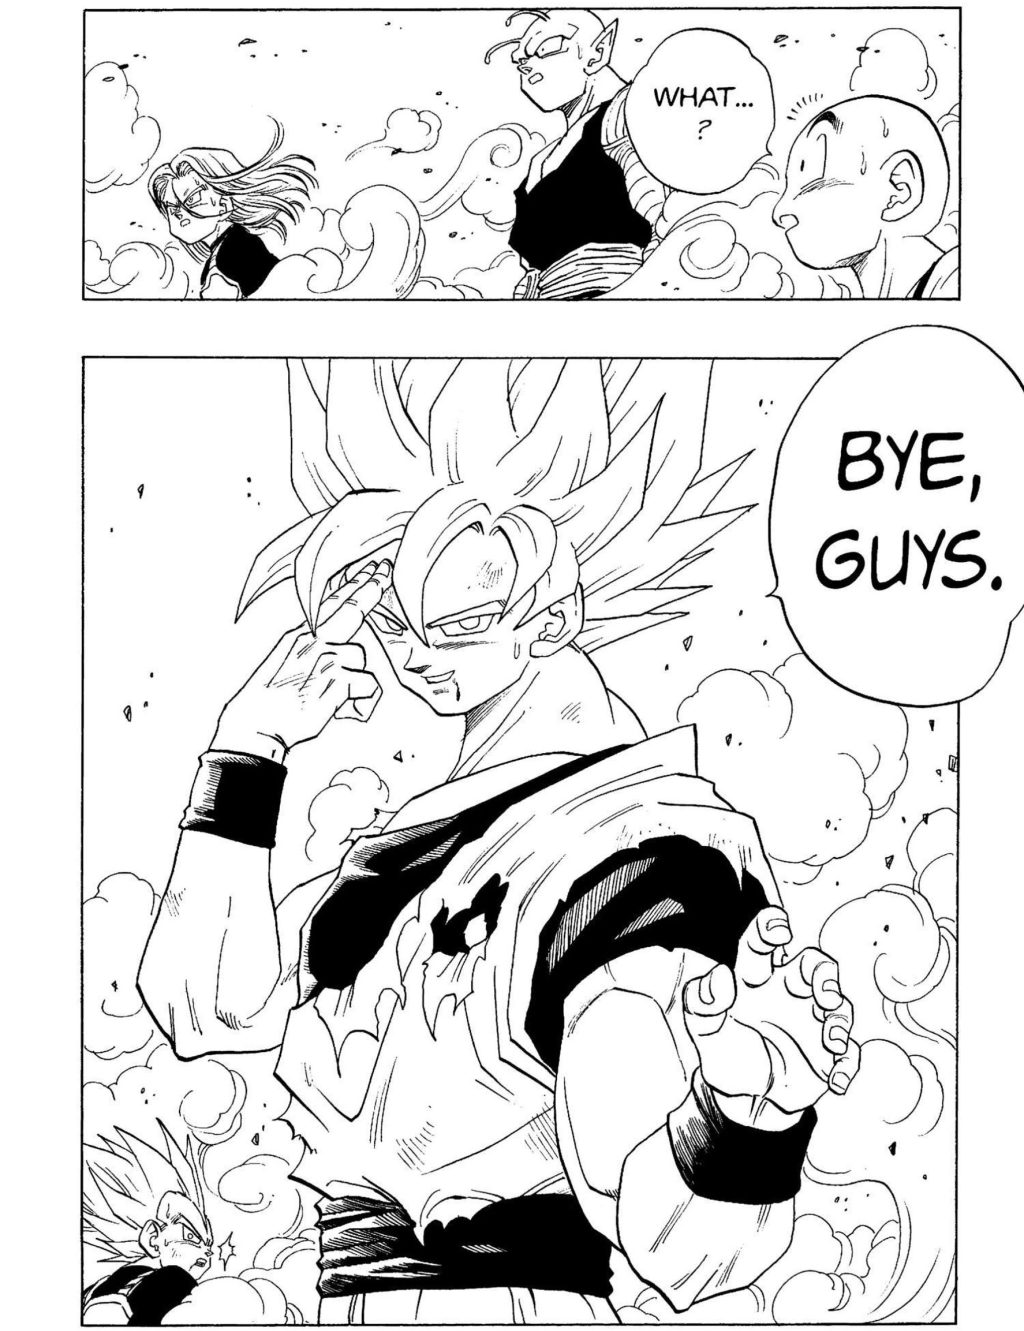 Goku prepares to sacrifice himself to prevent Cell's self-destruction from destroying the Earth in Dragon Ball Chapter 411 "Cell, Brought to Bay" (1993), Shueisha. Words and art by Akira Toriyama.